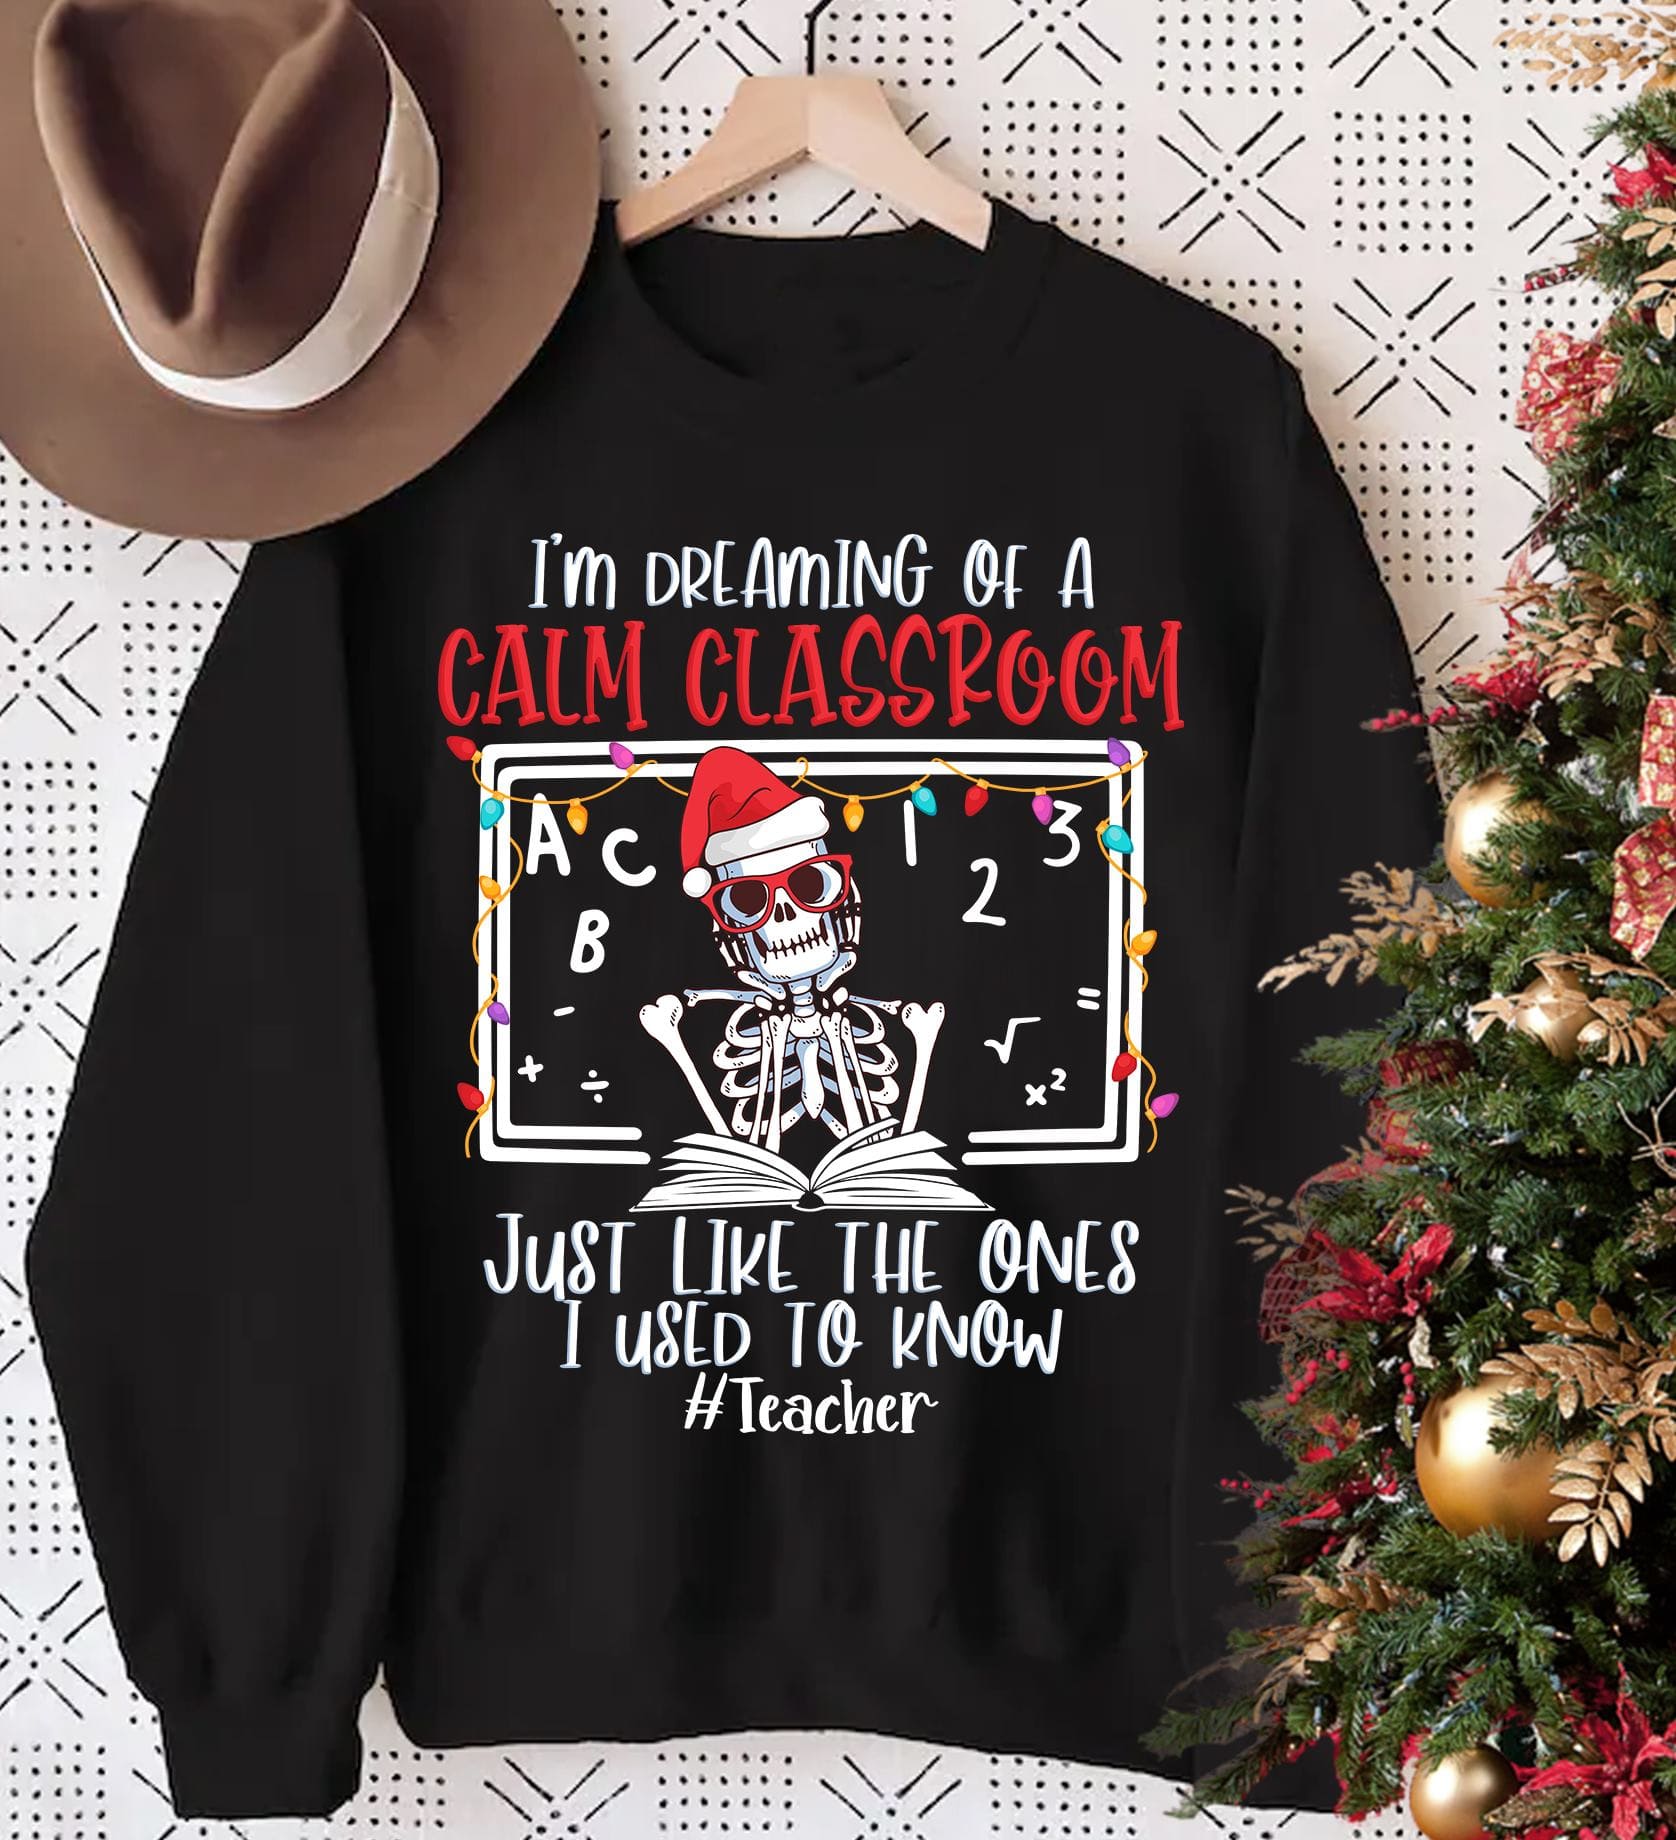 I'm dreaming of a calm classroom just like the ones I used to know - Halloween gift for teacher, Halloween and Christmas